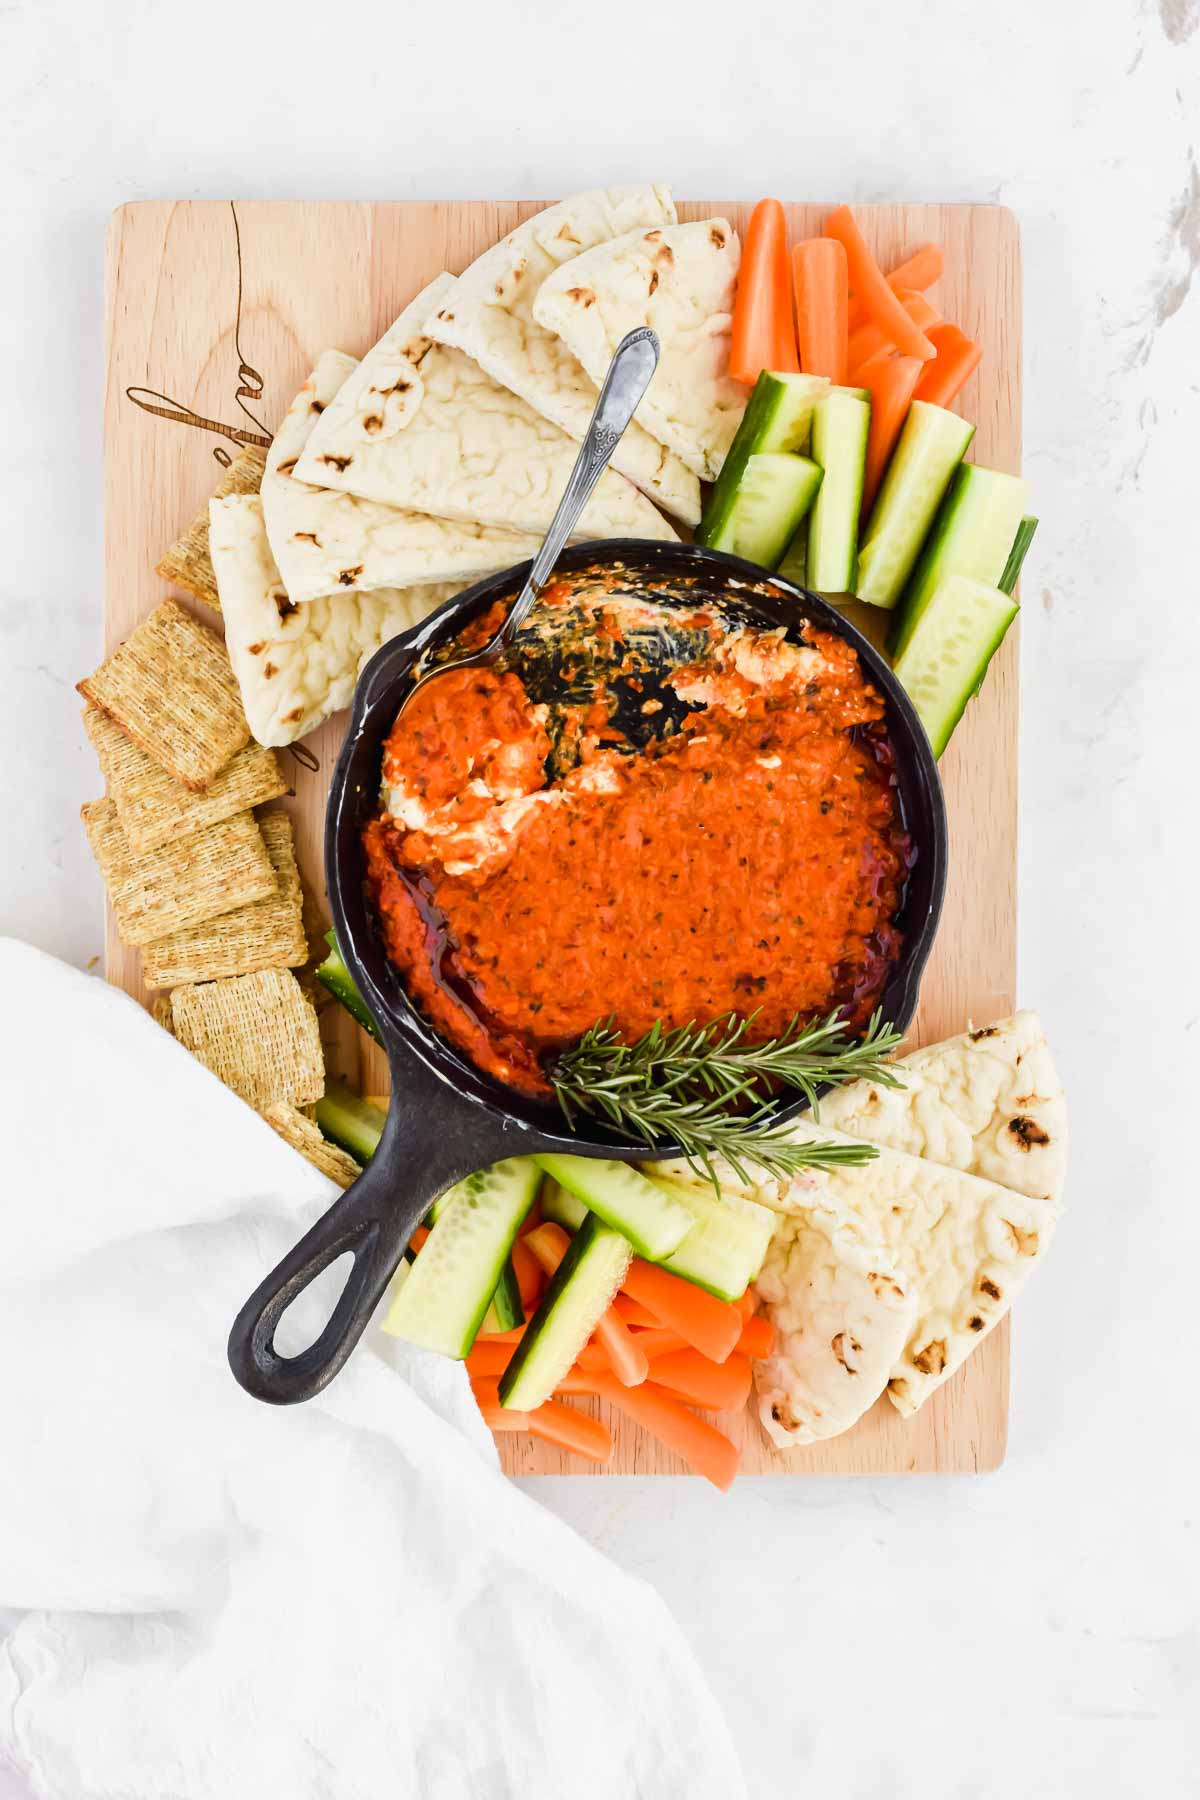 romesco dip in a cast iron skillet served with crackers, pita bread, and fresh vegetables.